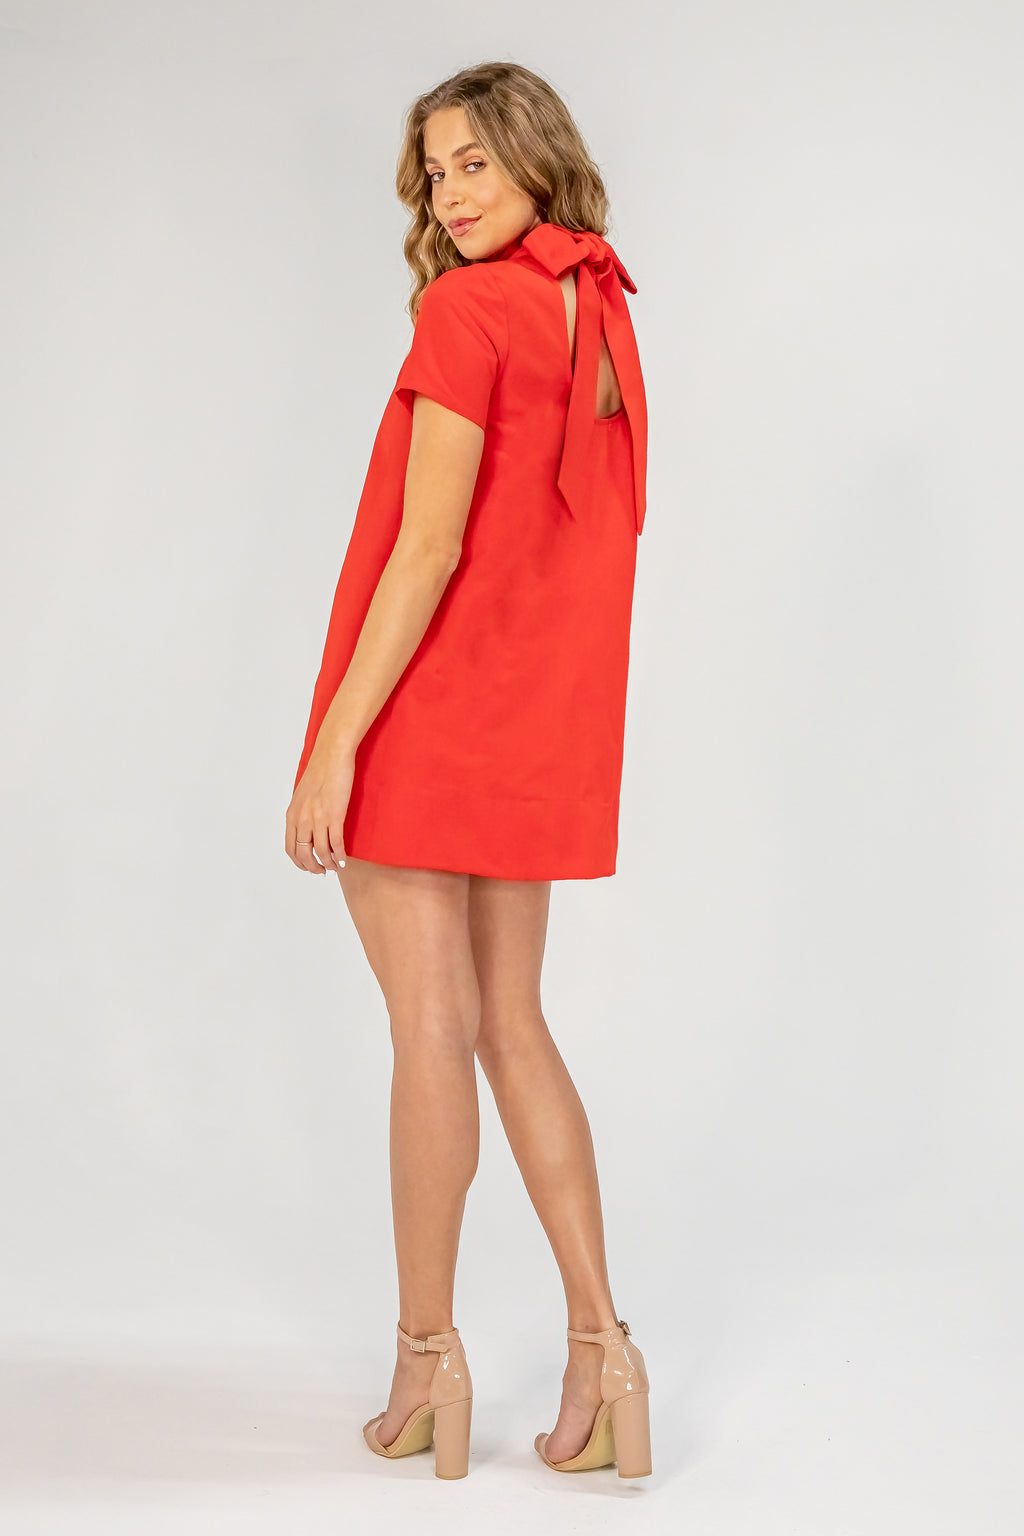 Lavender Brown Rory Dress in Bright Red